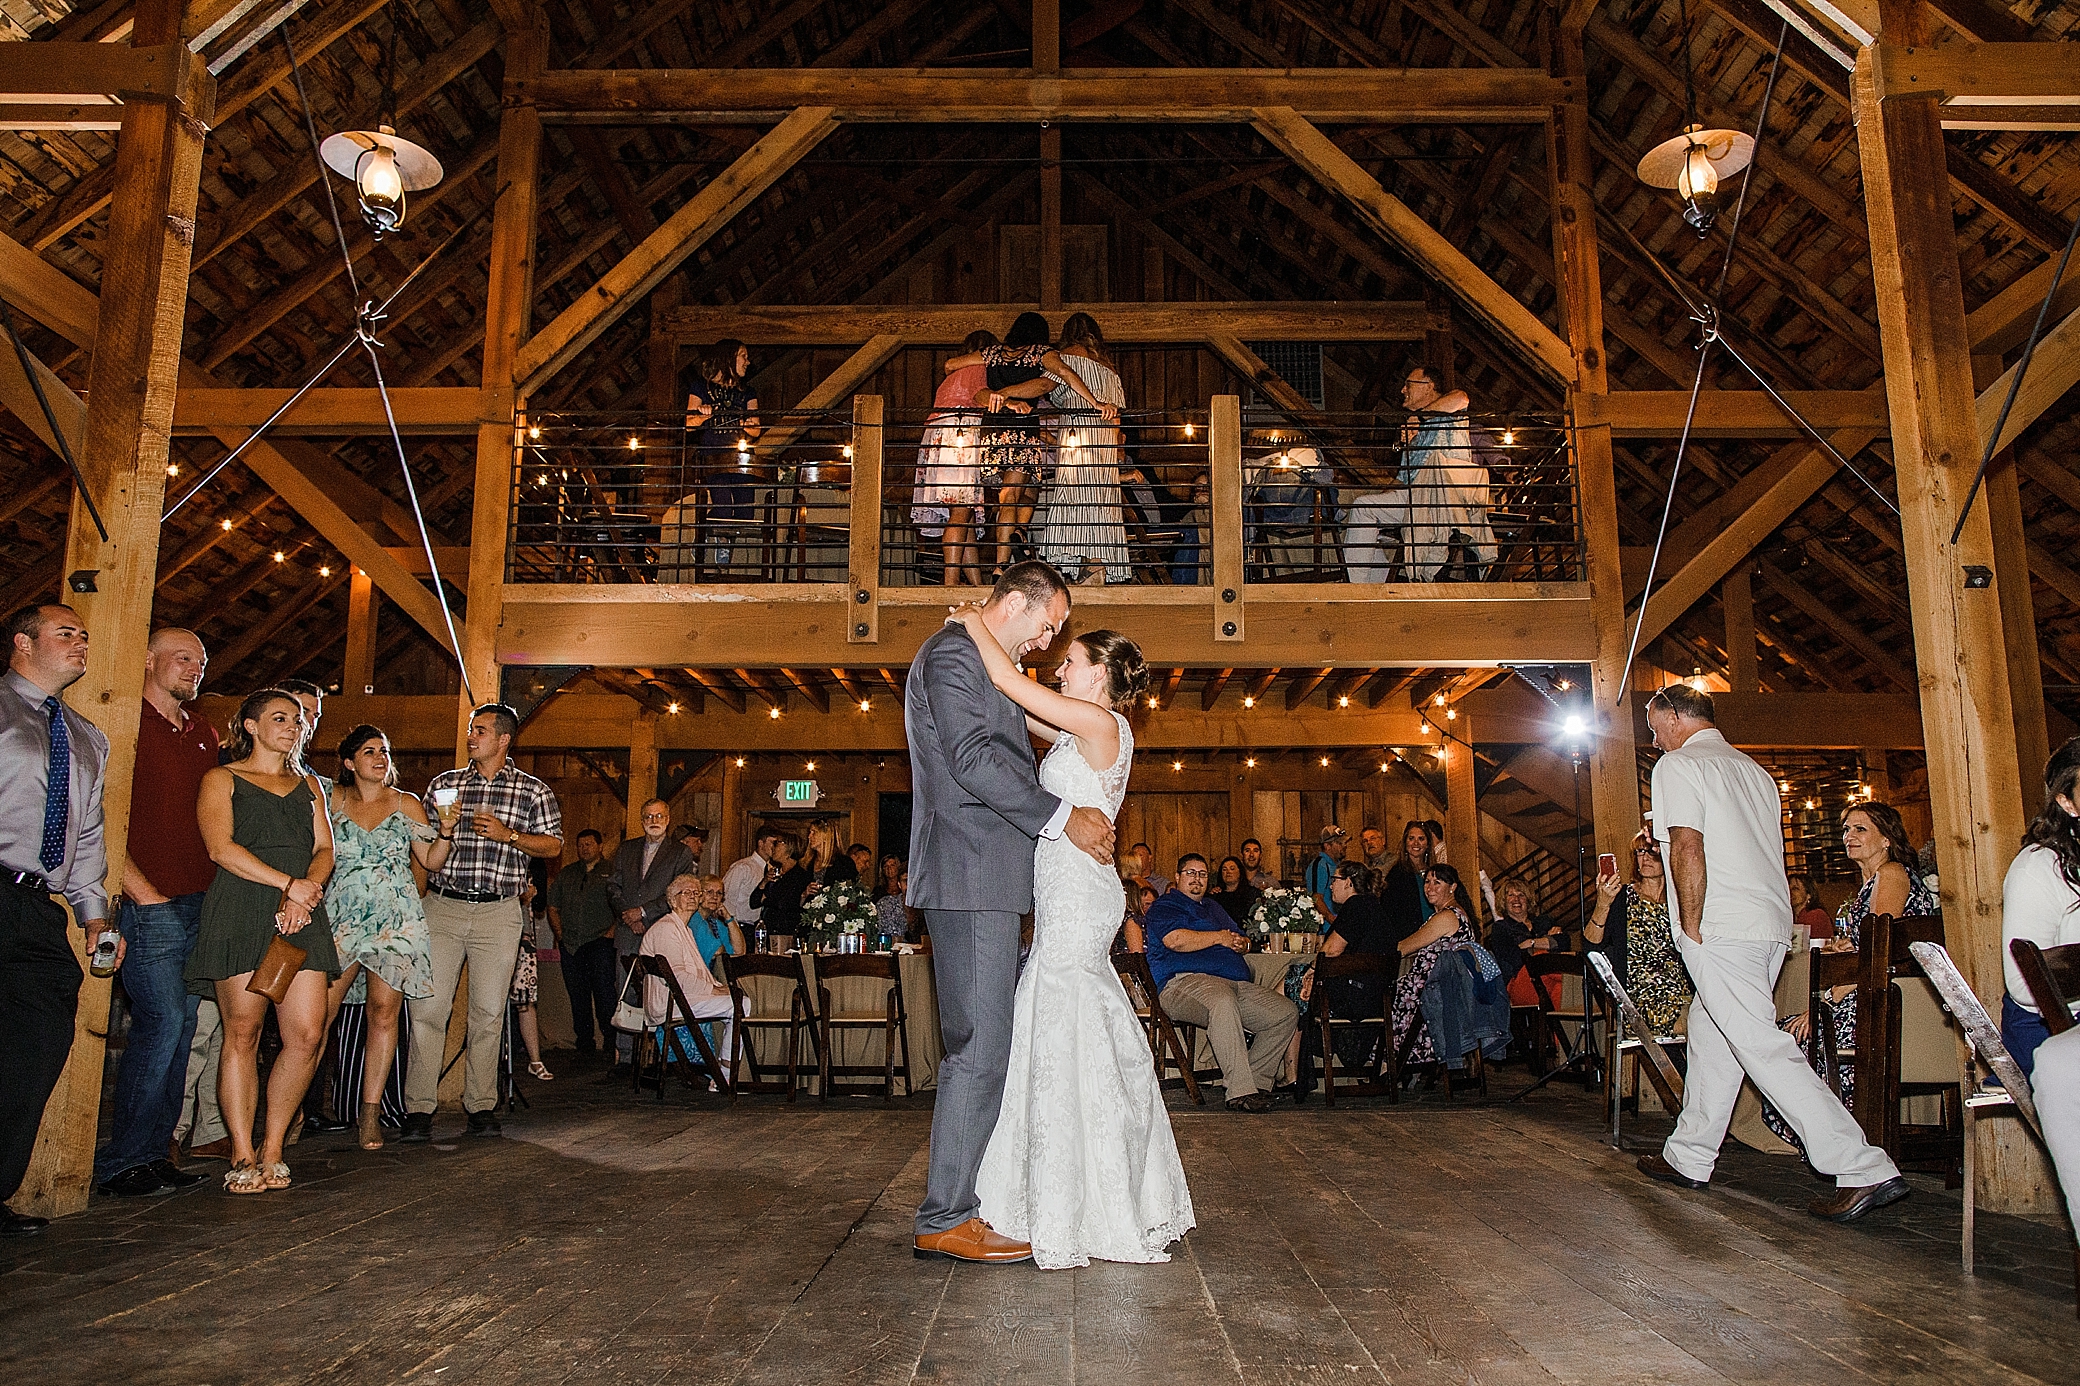 Bride and groom first dance at wedding reception at The Cattle Barn | Megan Montalvo Photography 